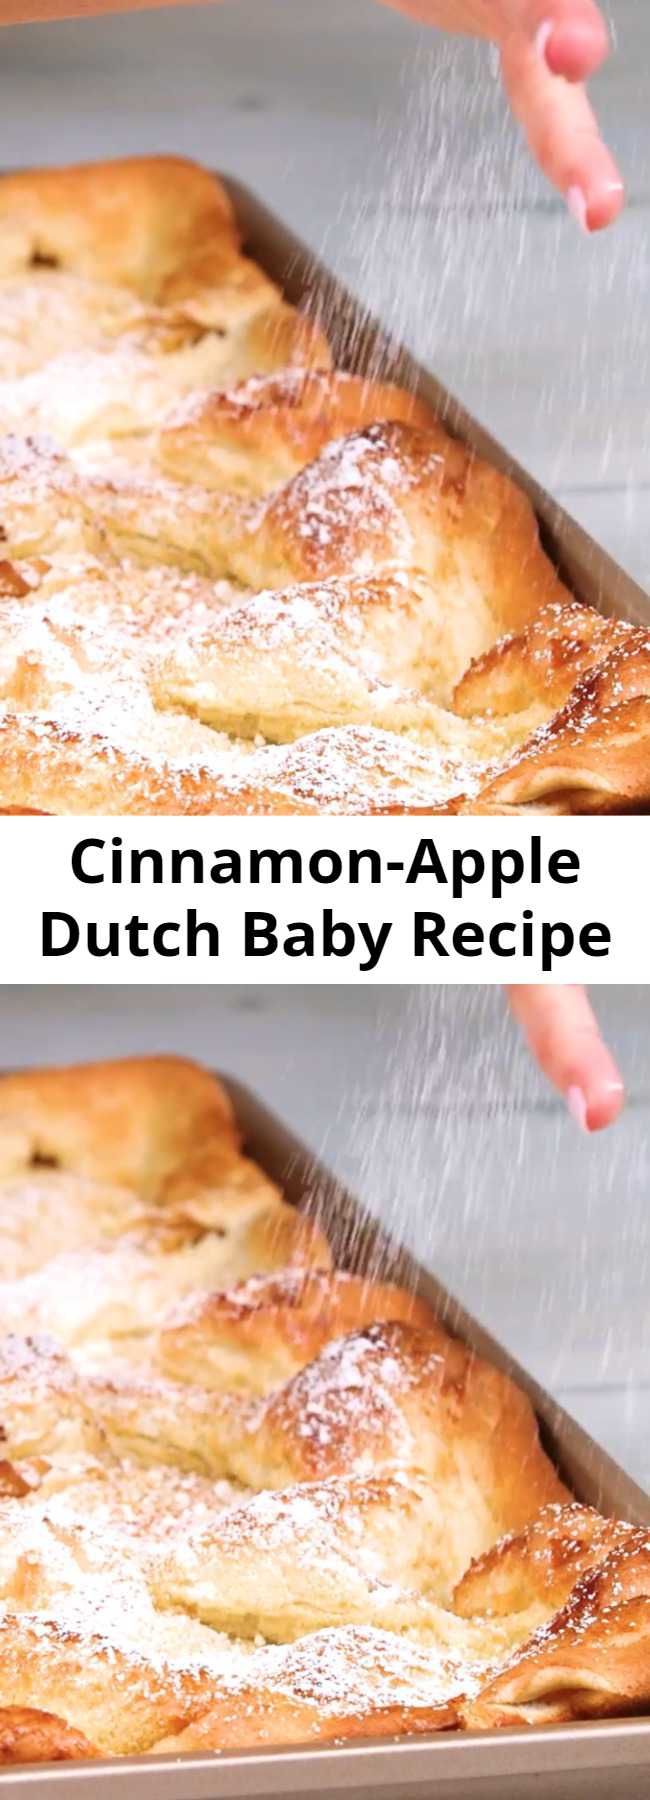 Cinnamon-Apple Dutch Baby Recipe - This sheet pan Dutch baby is a perfect dish to whip up for a group brunch, but can easily be transformed into dessert when served with a scoop of vanilla ice cream. 